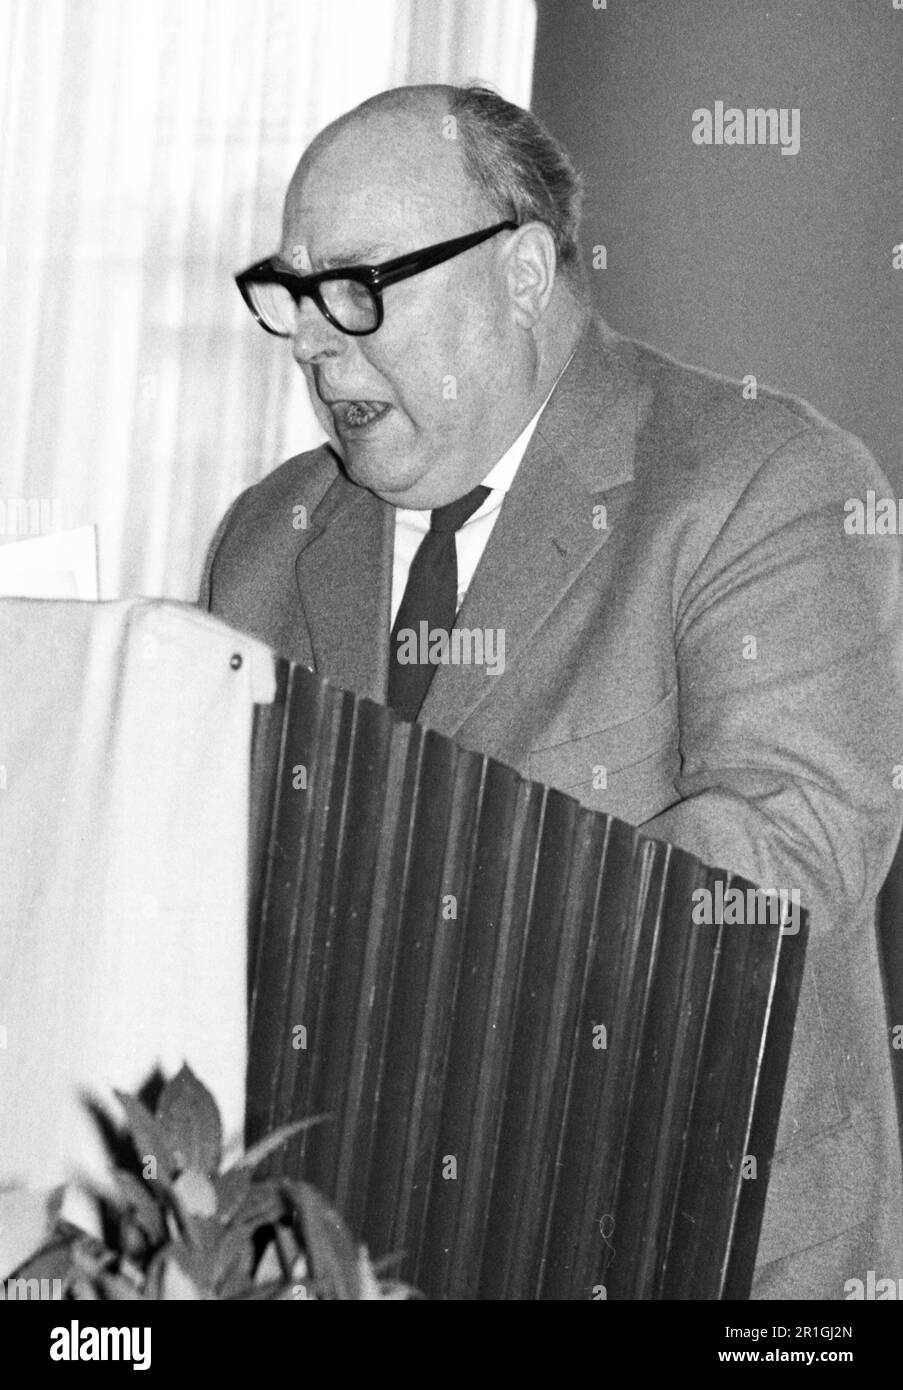 Personalities from politics, business and culture from the years 1965-71. Ernst von Salomon (writer), DEU, Germany Stock Photo